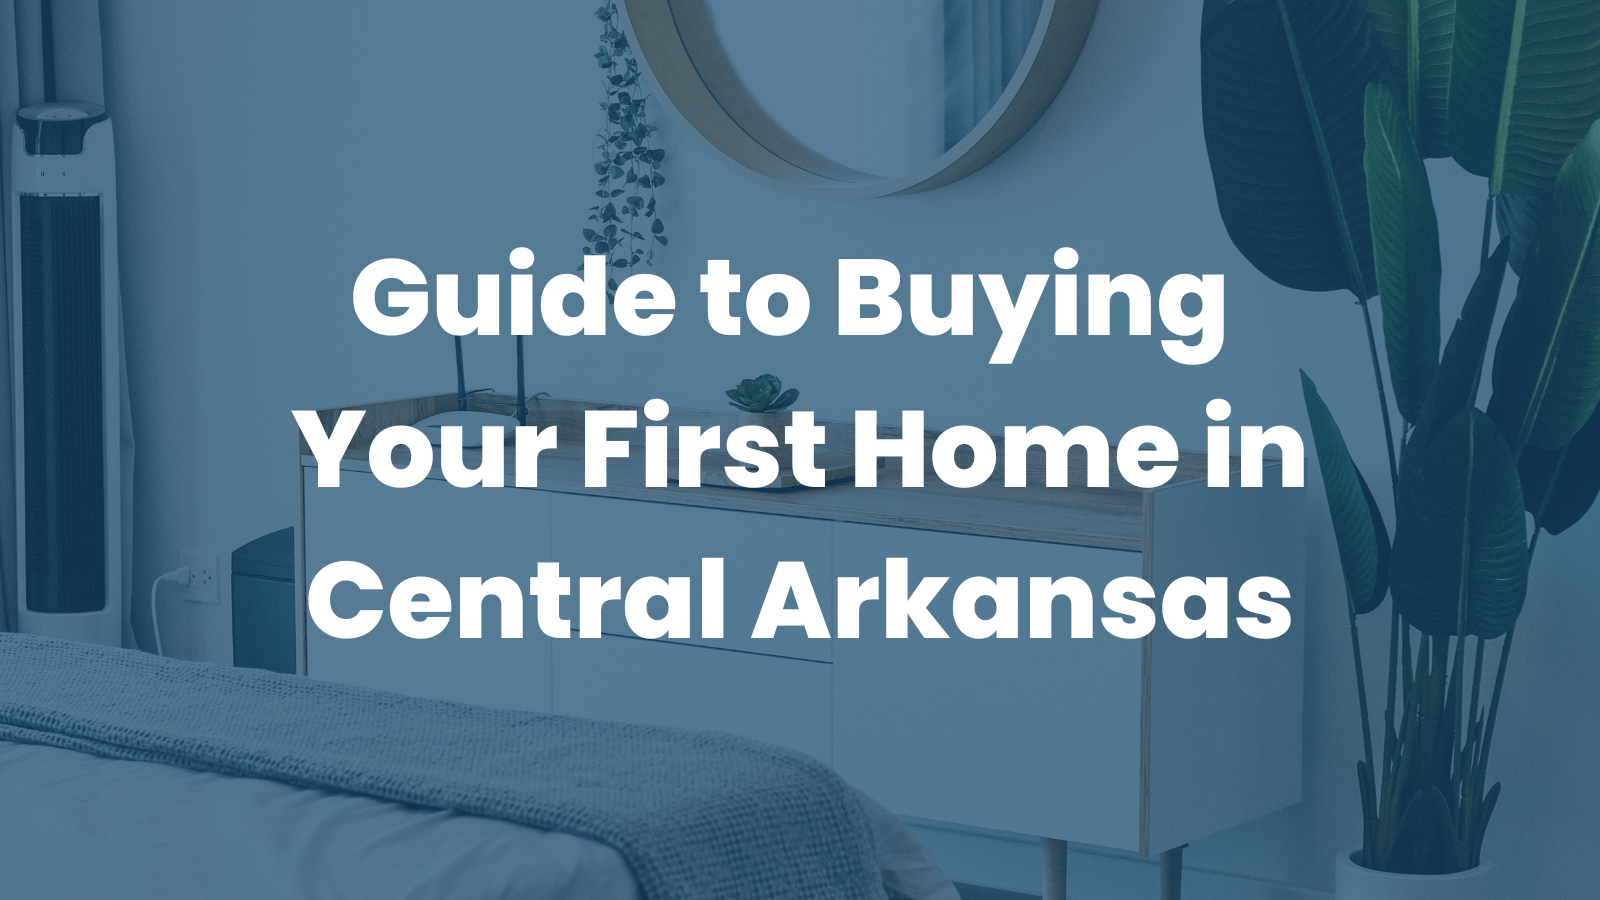 Guide to Buying Your First Home in Central Arkansas